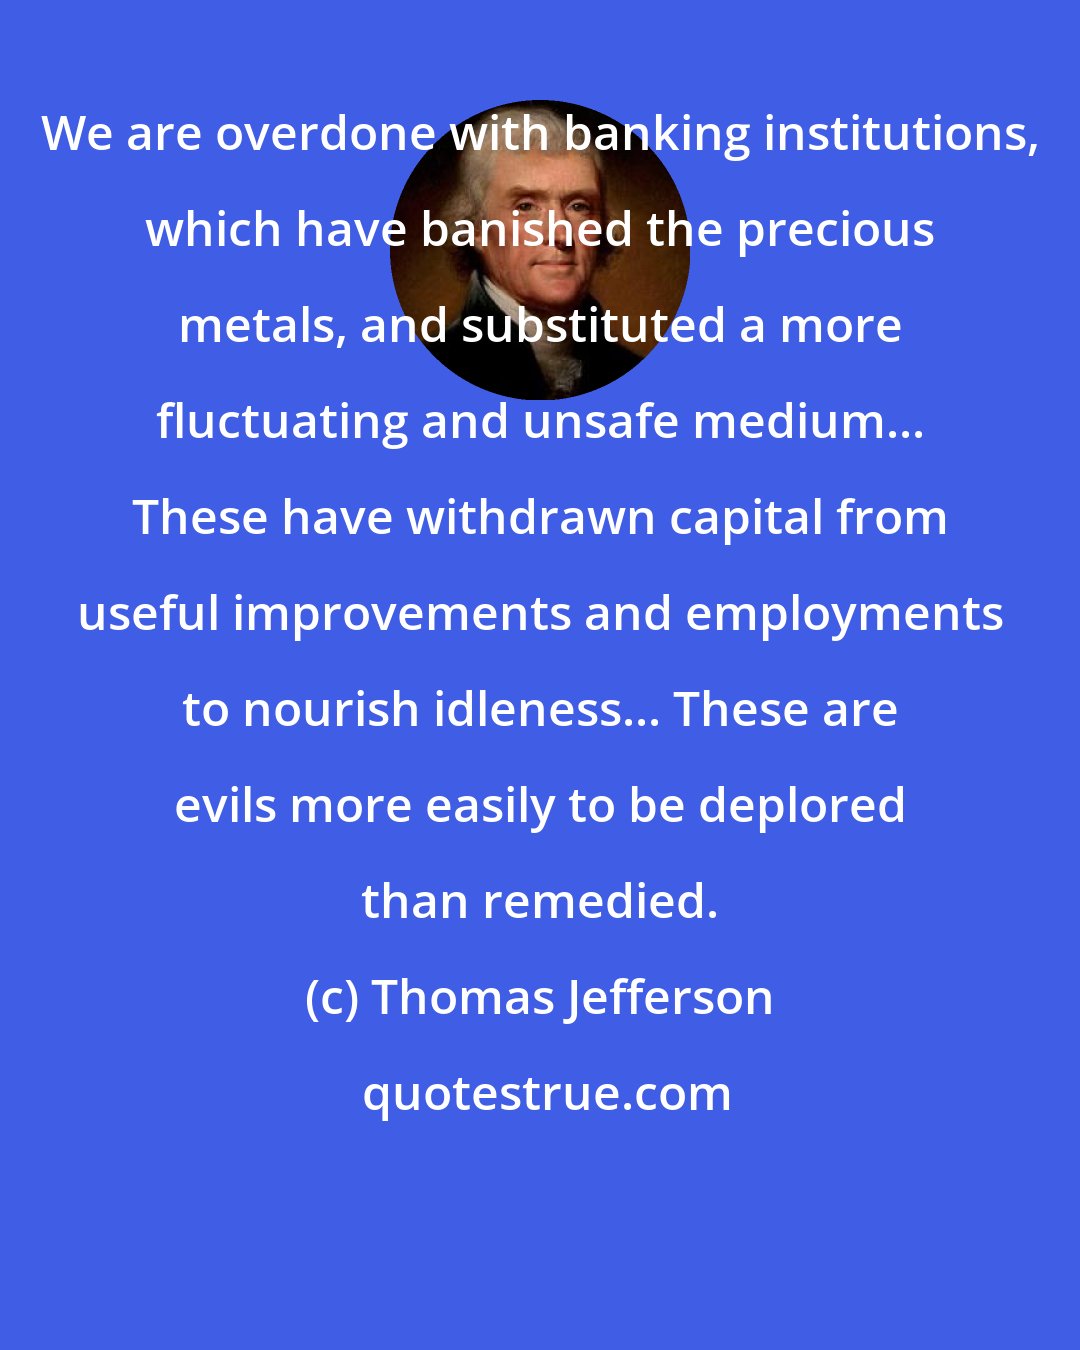 Thomas Jefferson: We are overdone with banking institutions, which have banished the precious metals, and substituted a more fluctuating and unsafe medium... These have withdrawn capital from useful improvements and employments to nourish idleness... These are evils more easily to be deplored than remedied.